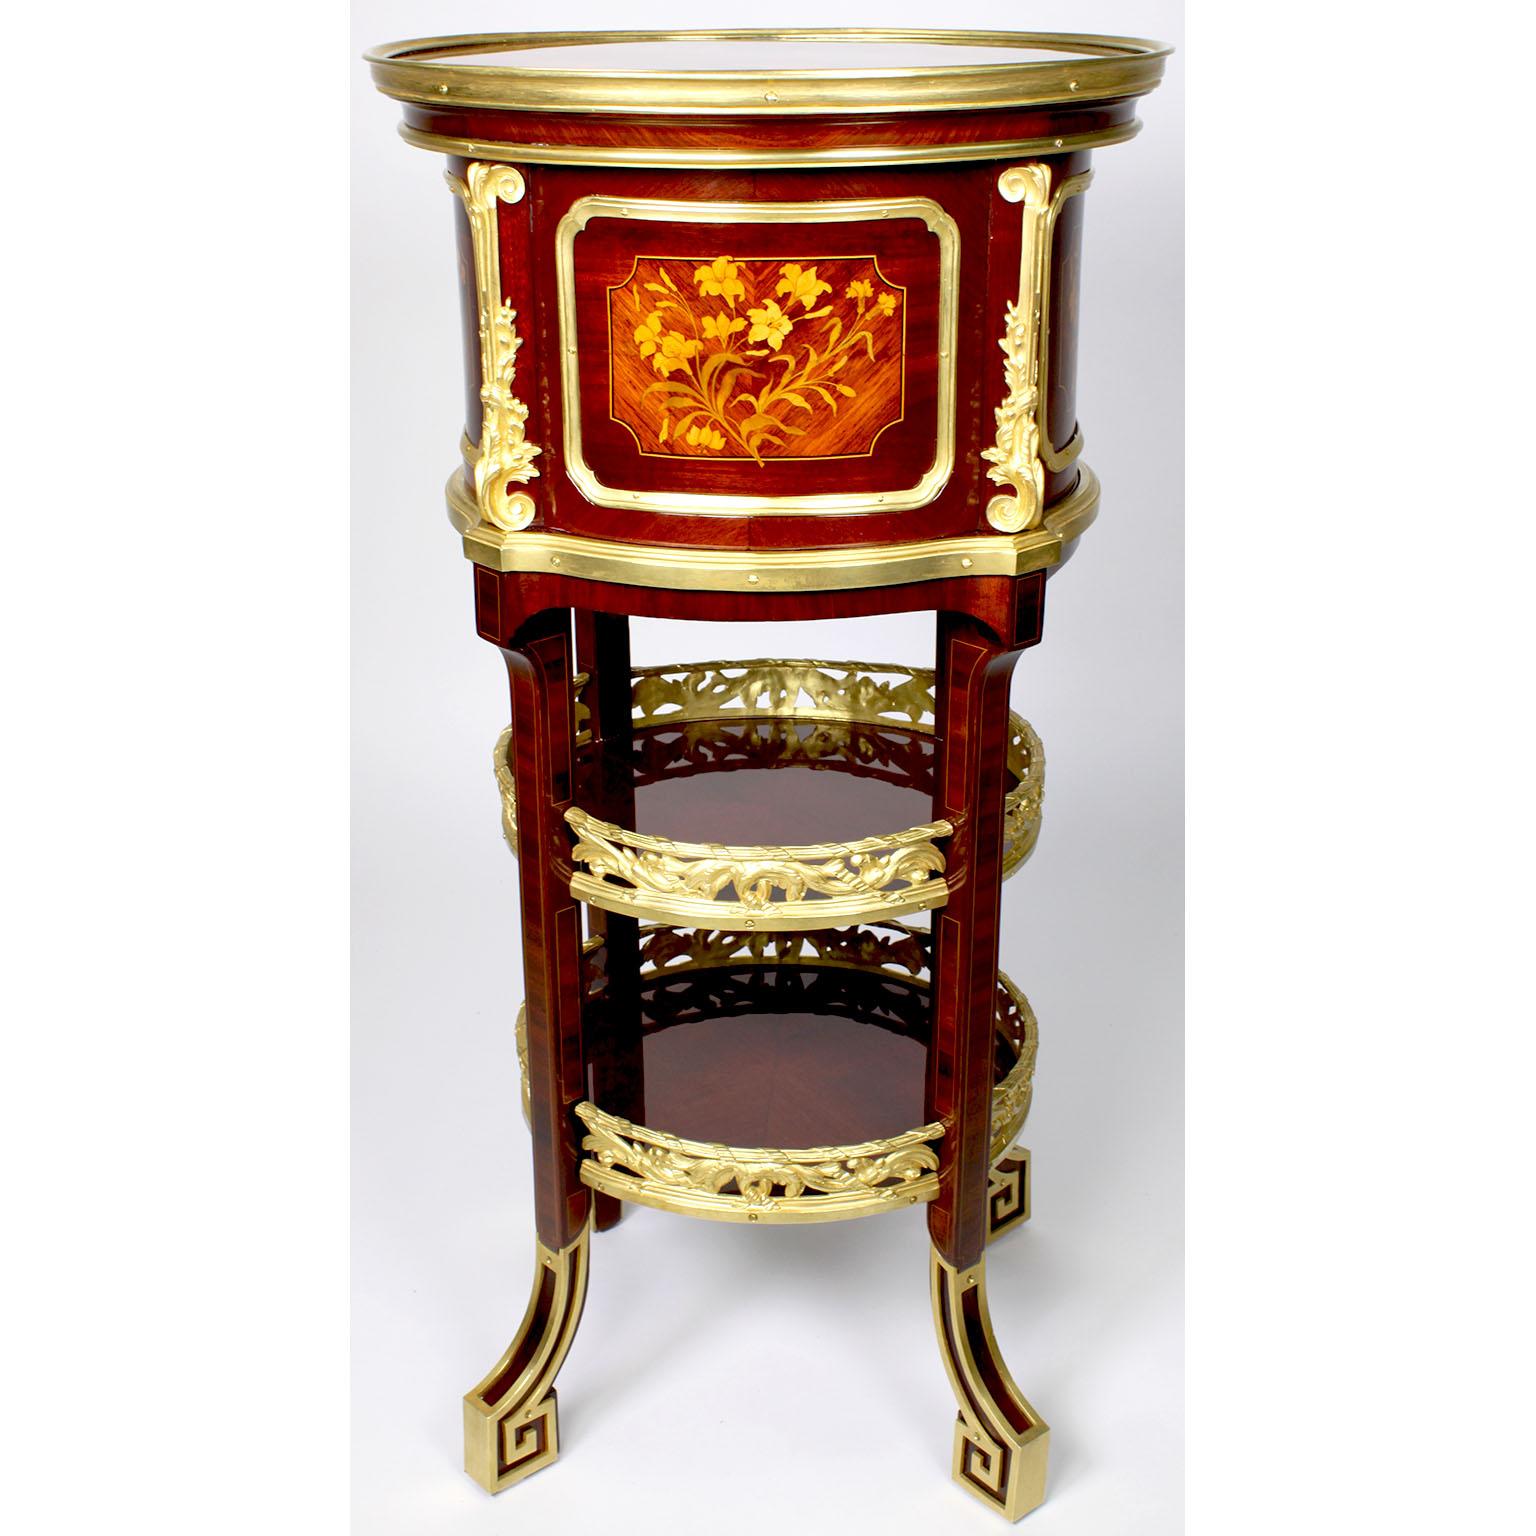 Pr French 19th-20th Century Ormolu Mounted Side-Tables Zwiener-Jansen Successeur In Good Condition For Sale In Los Angeles, CA